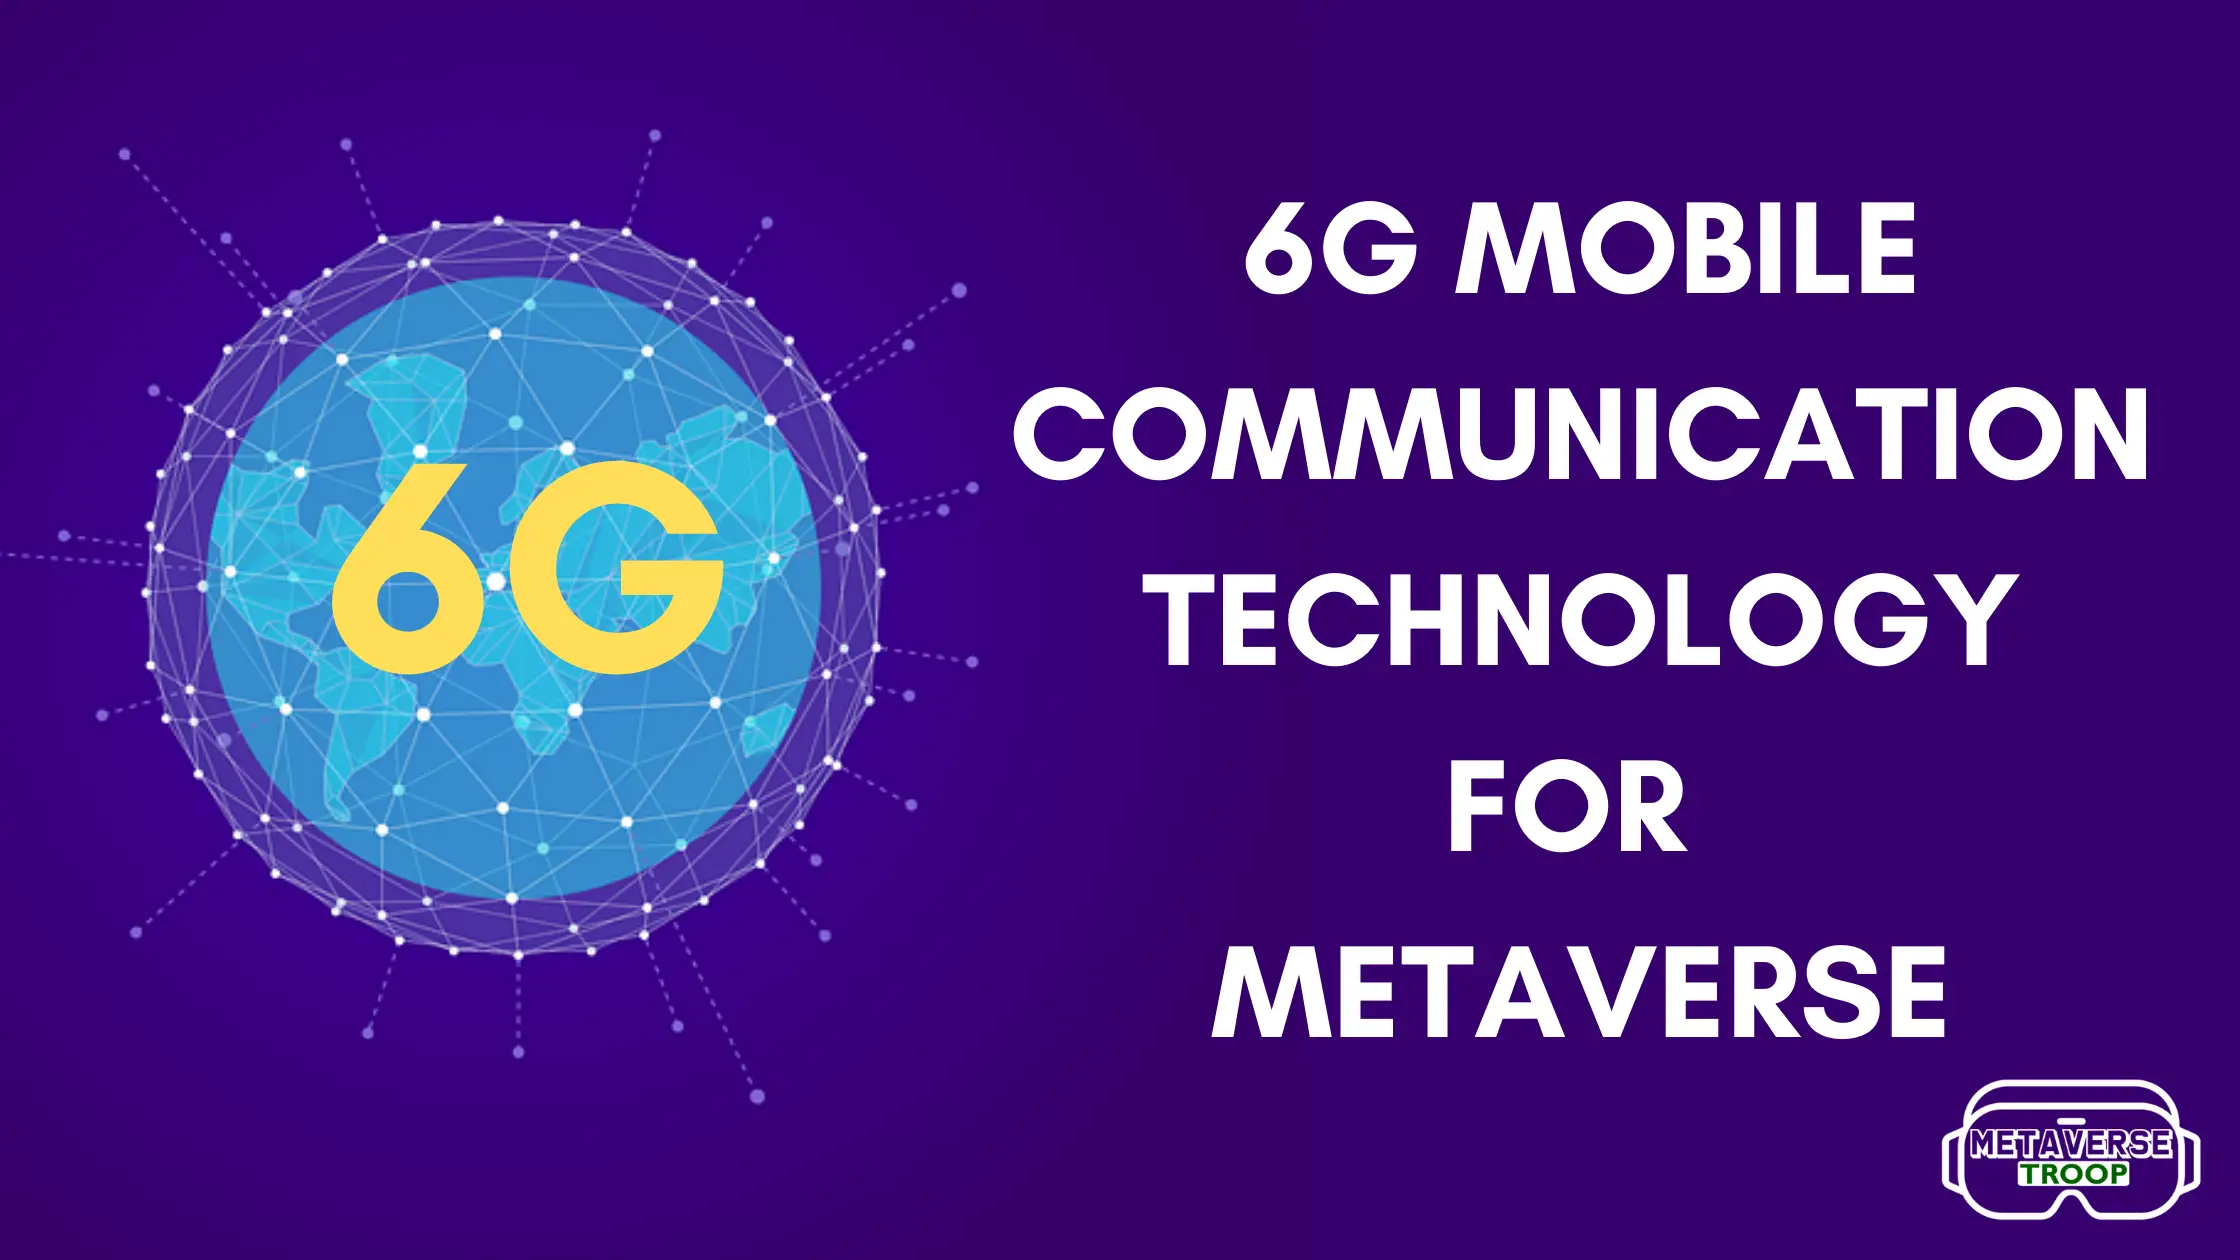 6G mobile communication technology for metaverse